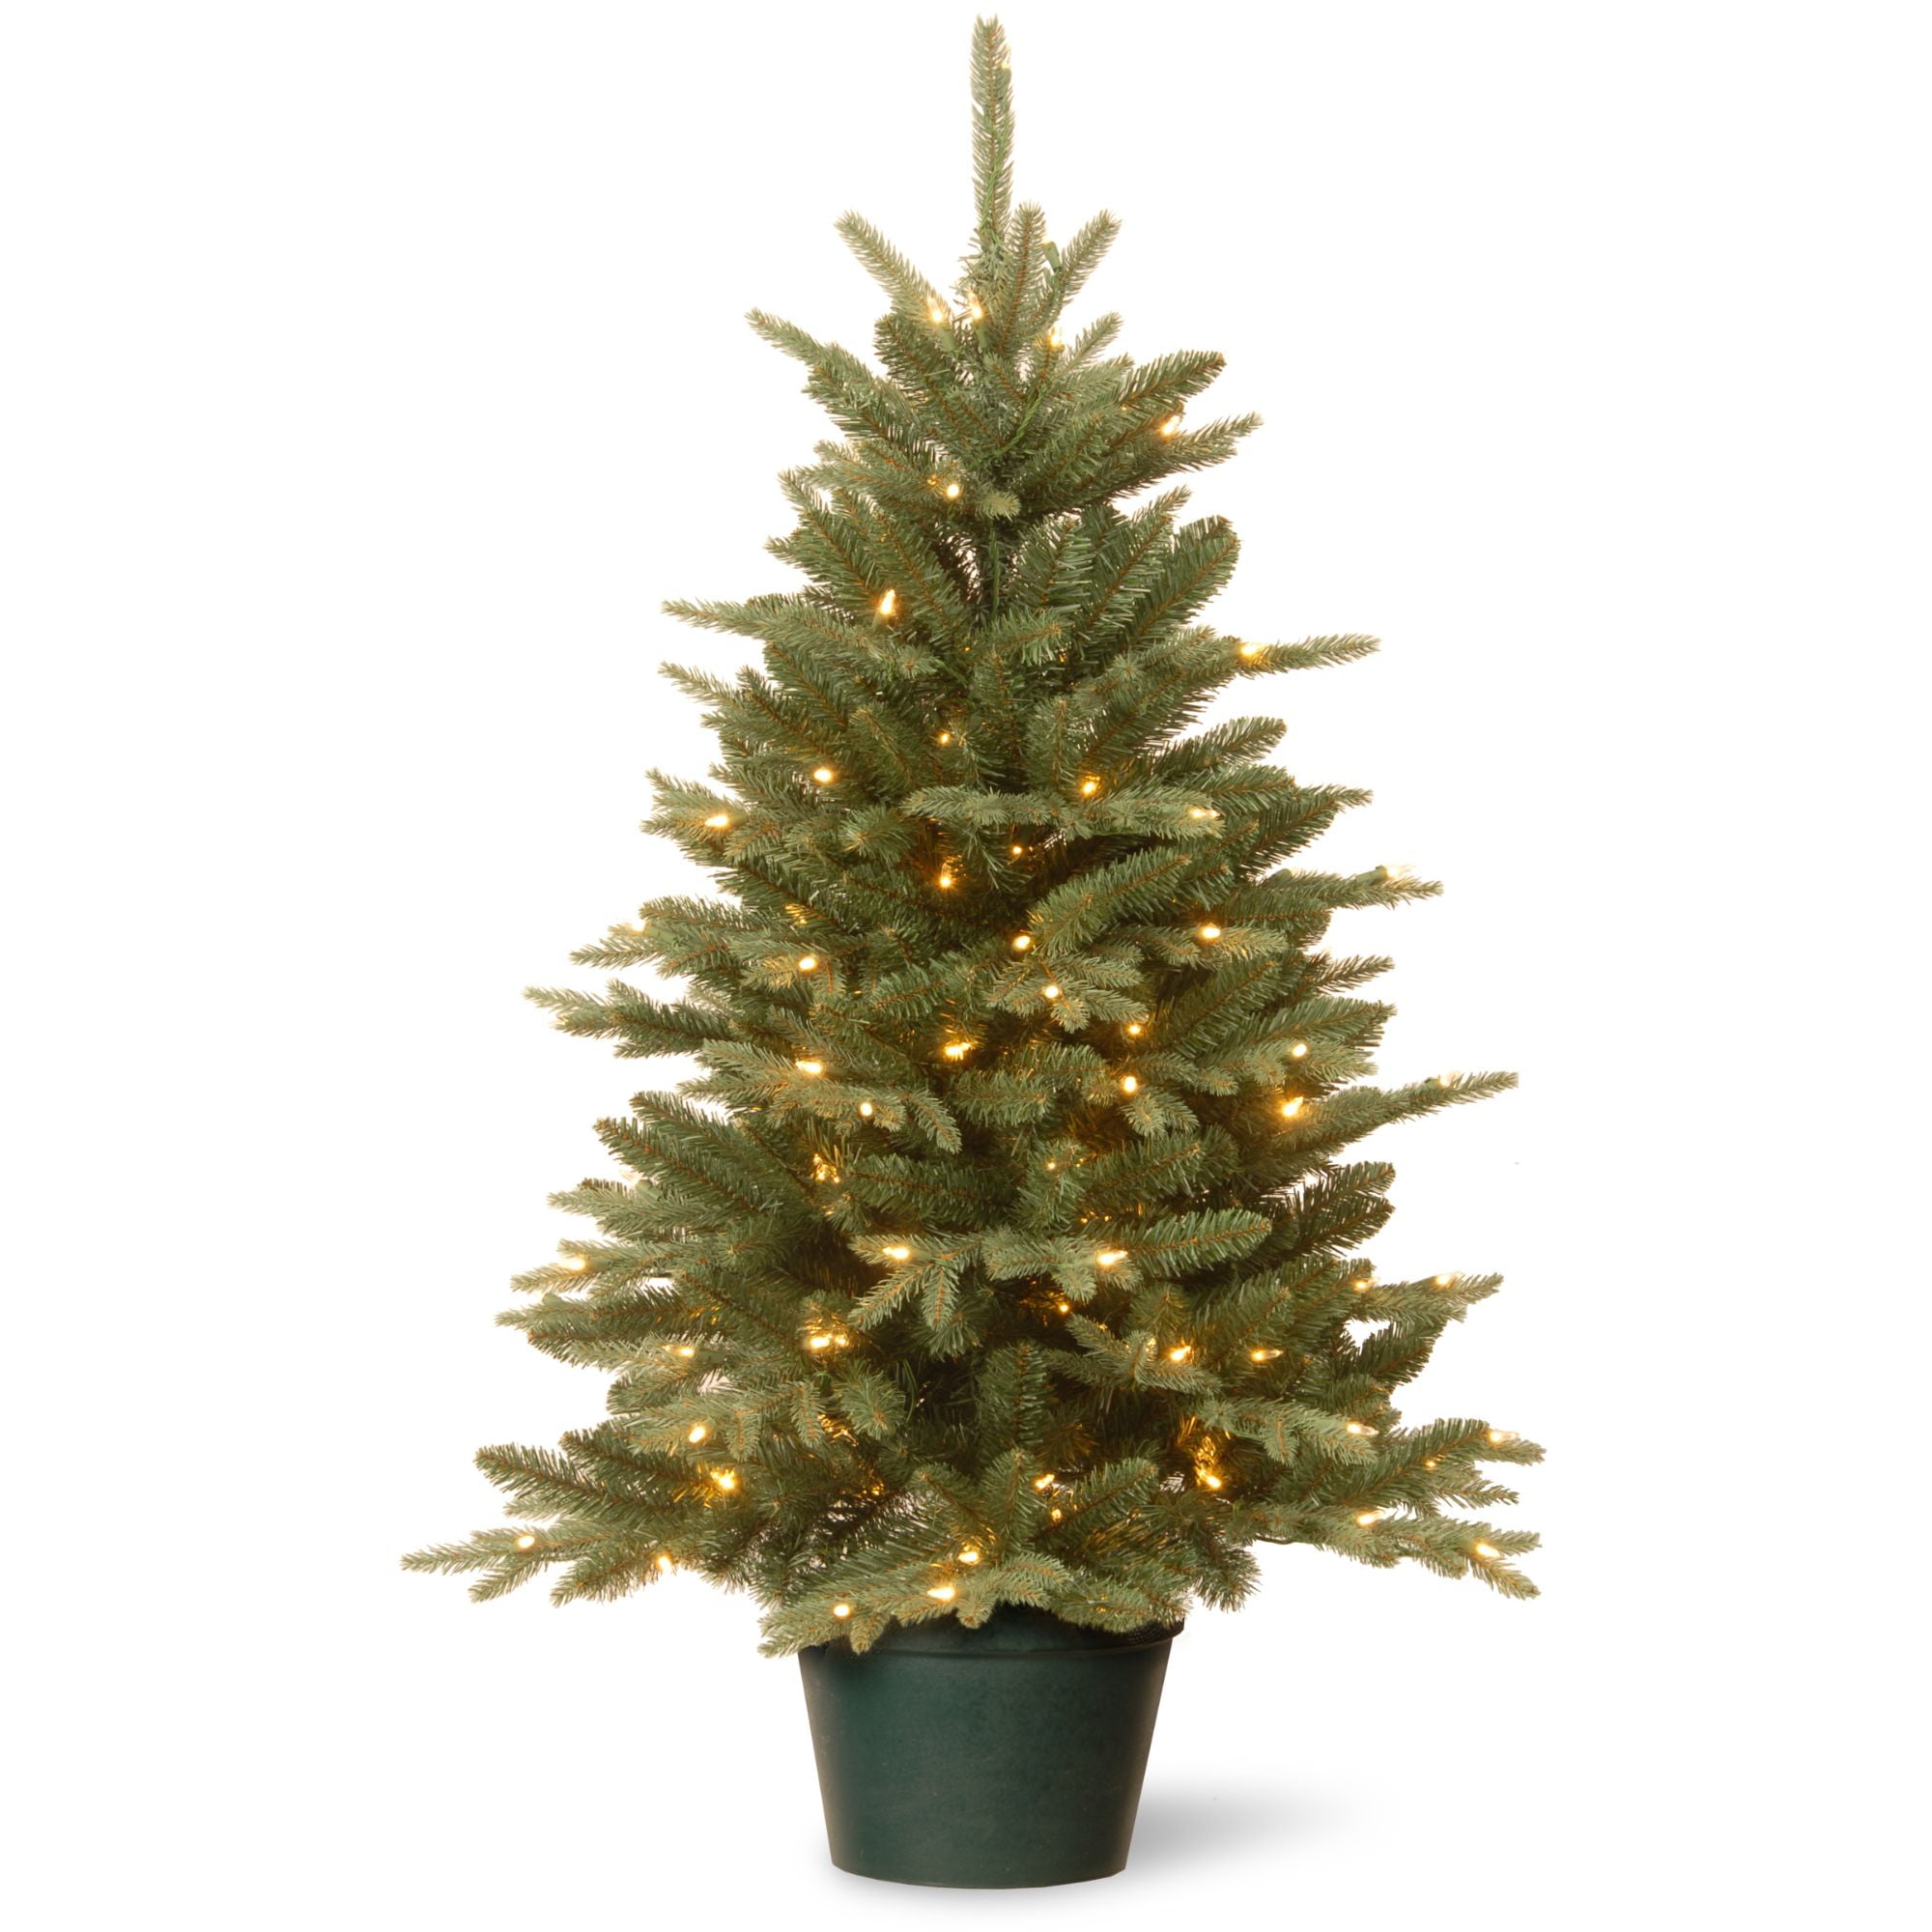 Details about   3 Foot Pre-Lighted Evergreen Christmas Tree With Designer Bow & 100 Clear Lights 